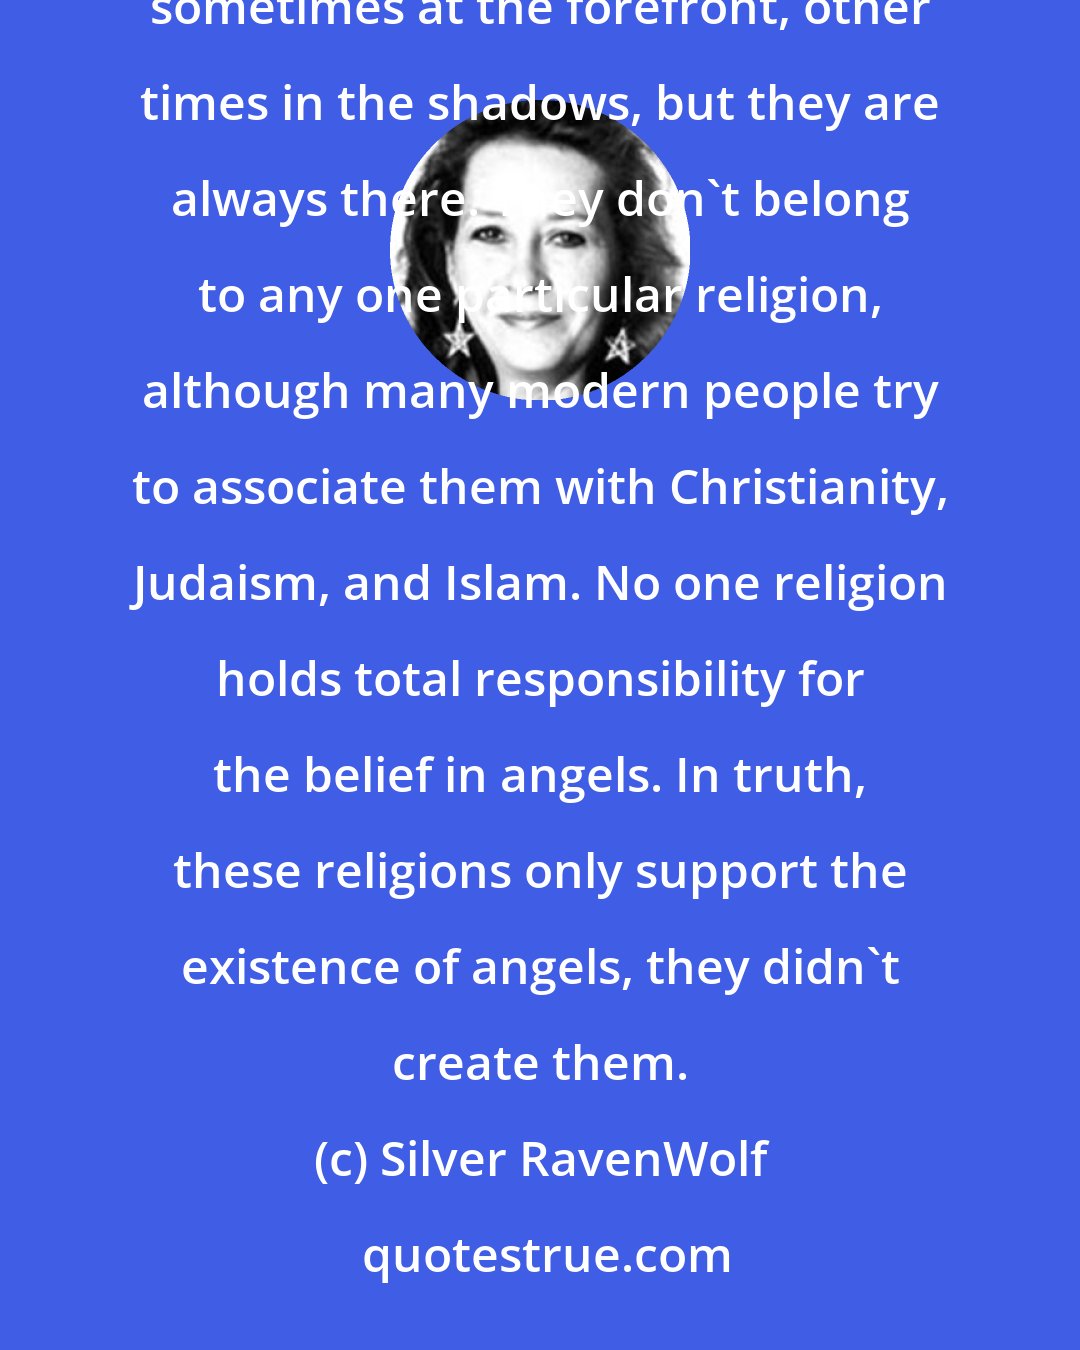 Silver RavenWolf: Angels appear to transcend all cultures, races, and systems. They are a part of human history and civilization, sometimes at the forefront, other times in the shadows, but they are always there. They don't belong to any one particular religion, although many modern people try to associate them with Christianity, Judaism, and Islam. No one religion holds total responsibility for the belief in angels. In truth, these religions only support the existence of angels, they didn't create them.